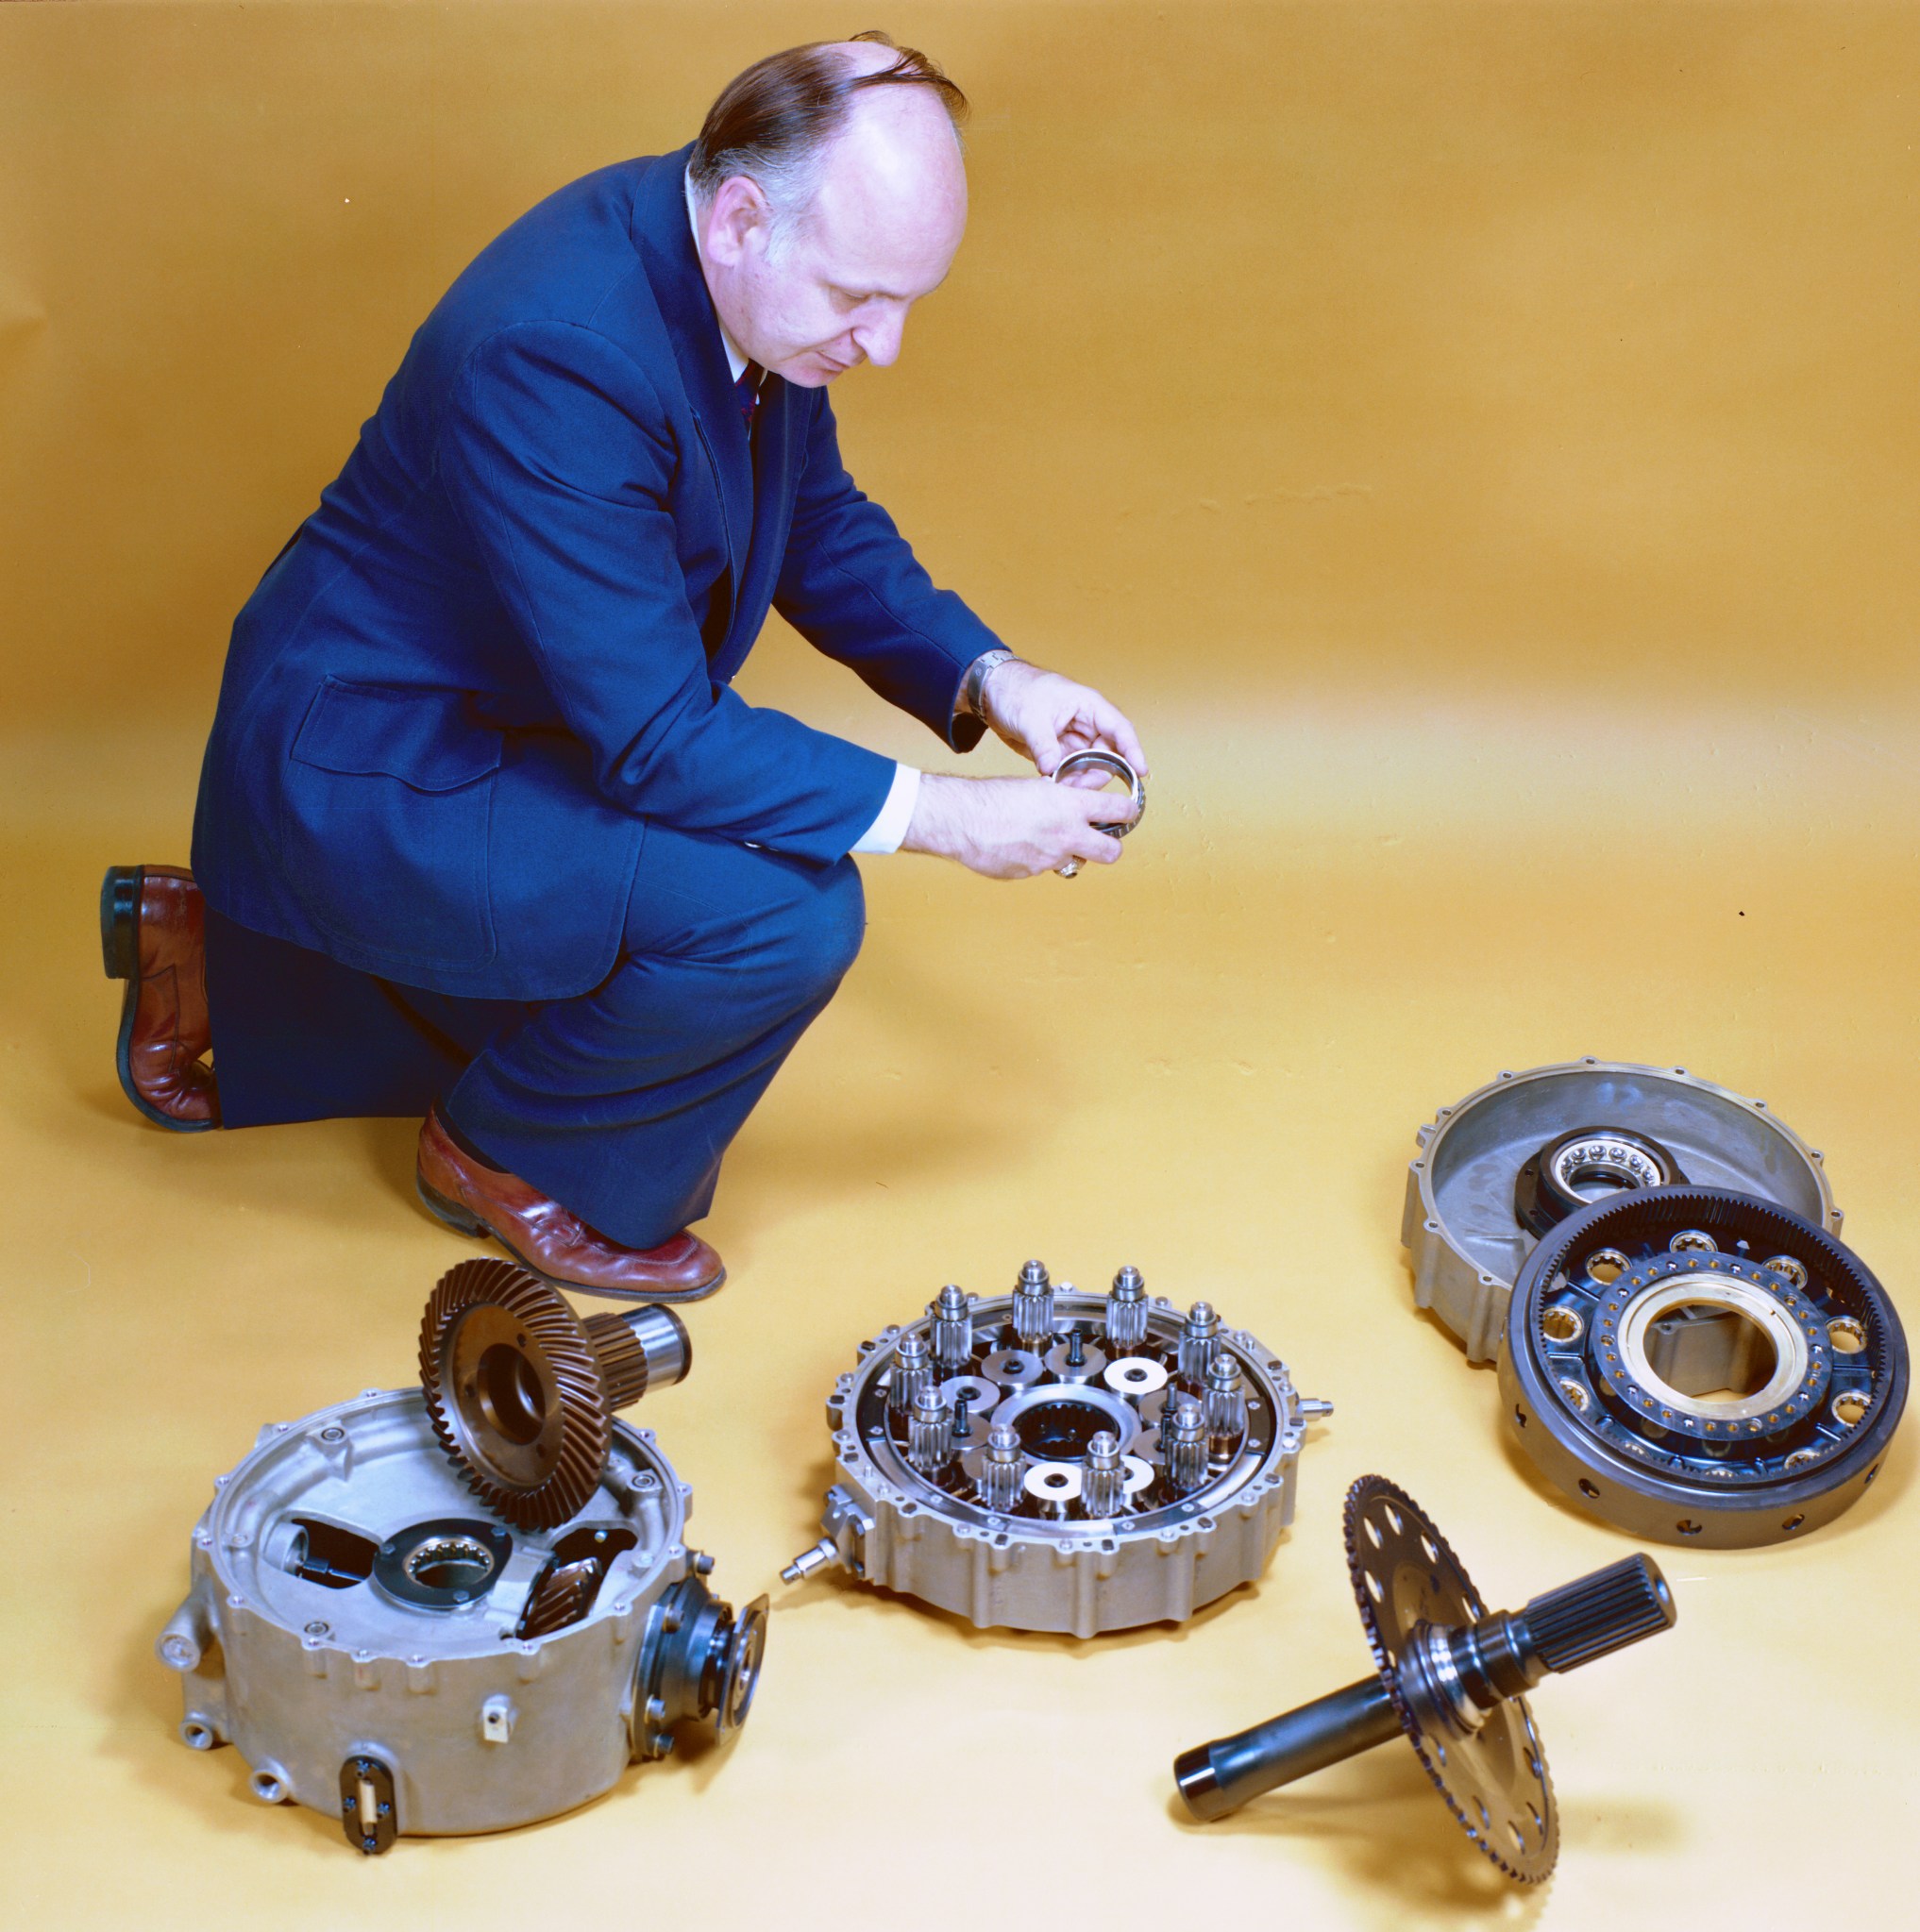 Man kneeling to look at rotor components.